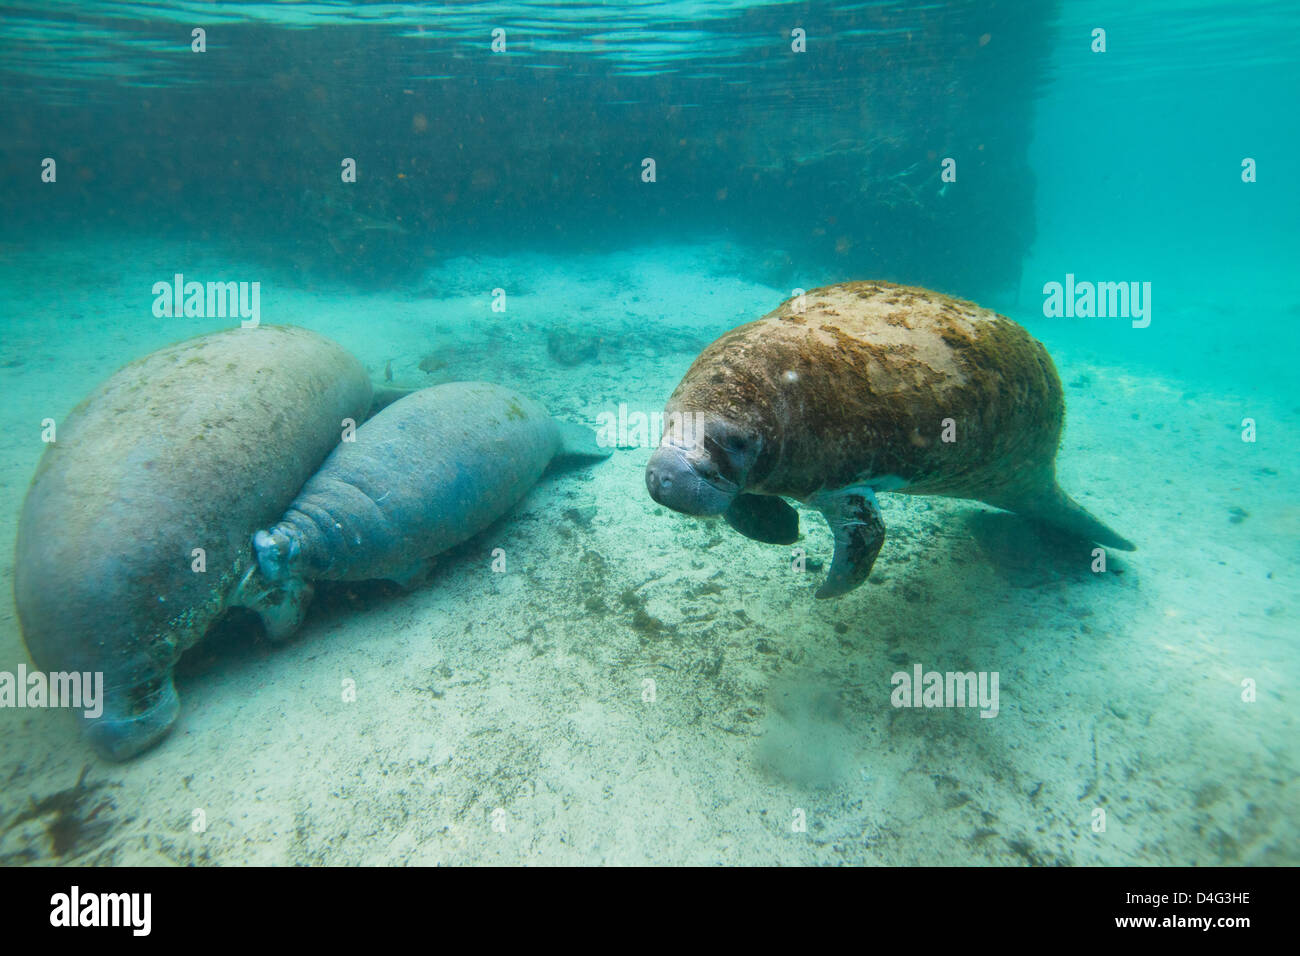 Mother and Baby West Indian Manatee or Trichechidae floating in tropical blue water in Crystal River Florida with a 3rd swimming Stock Photo